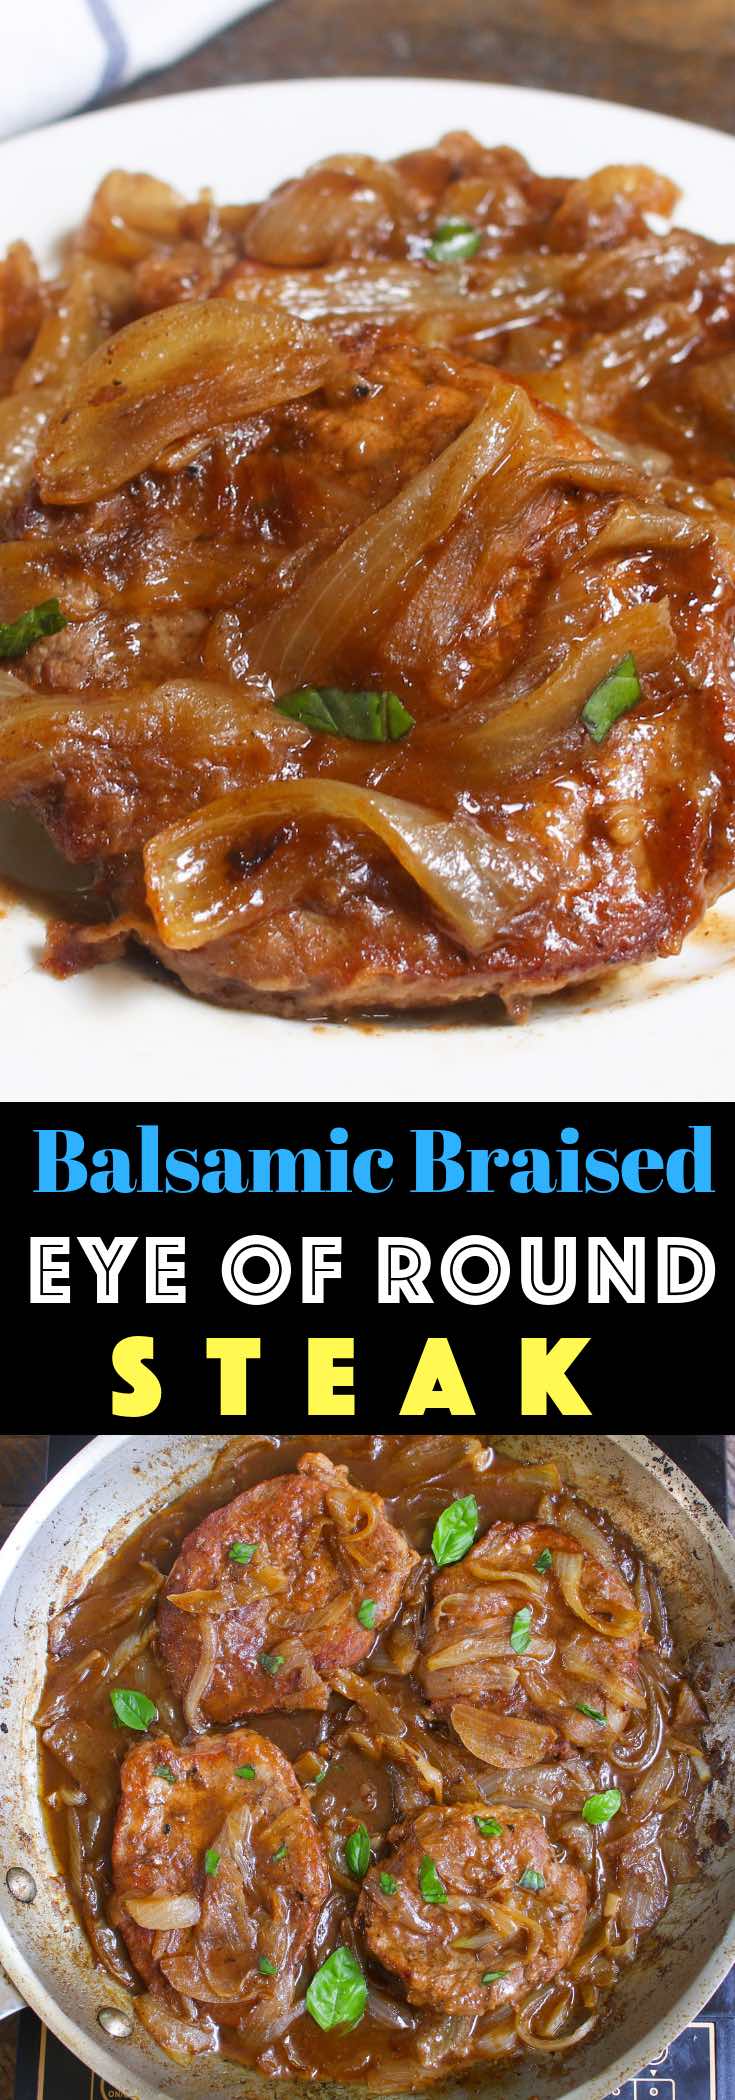 These Eye of Round Steaks are cooked low and slow until they reach fork-tender deliciousness! This simple Eye of Round Recipe is a classic where the braising method tenderizes lean and tough meat into mouth-watering pieces.